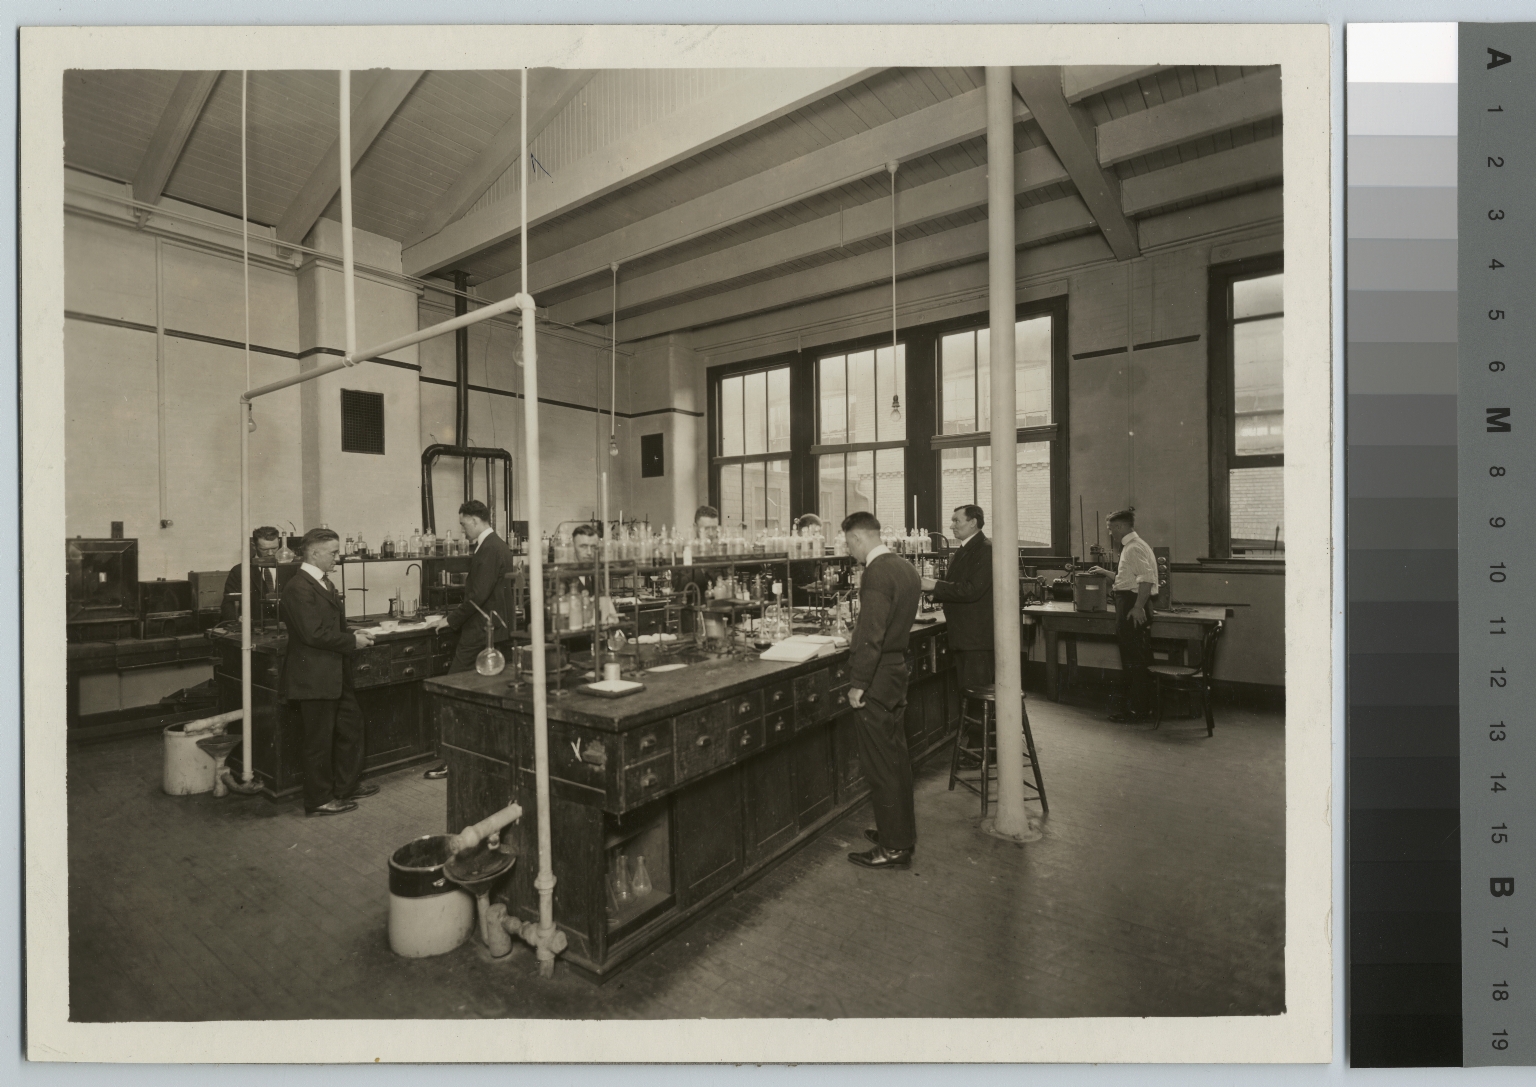 Academics, chemistry, Rochester Athenaeum and Mechanics Institute chemistry laboratory with male students working on experiments, [1920-1930]